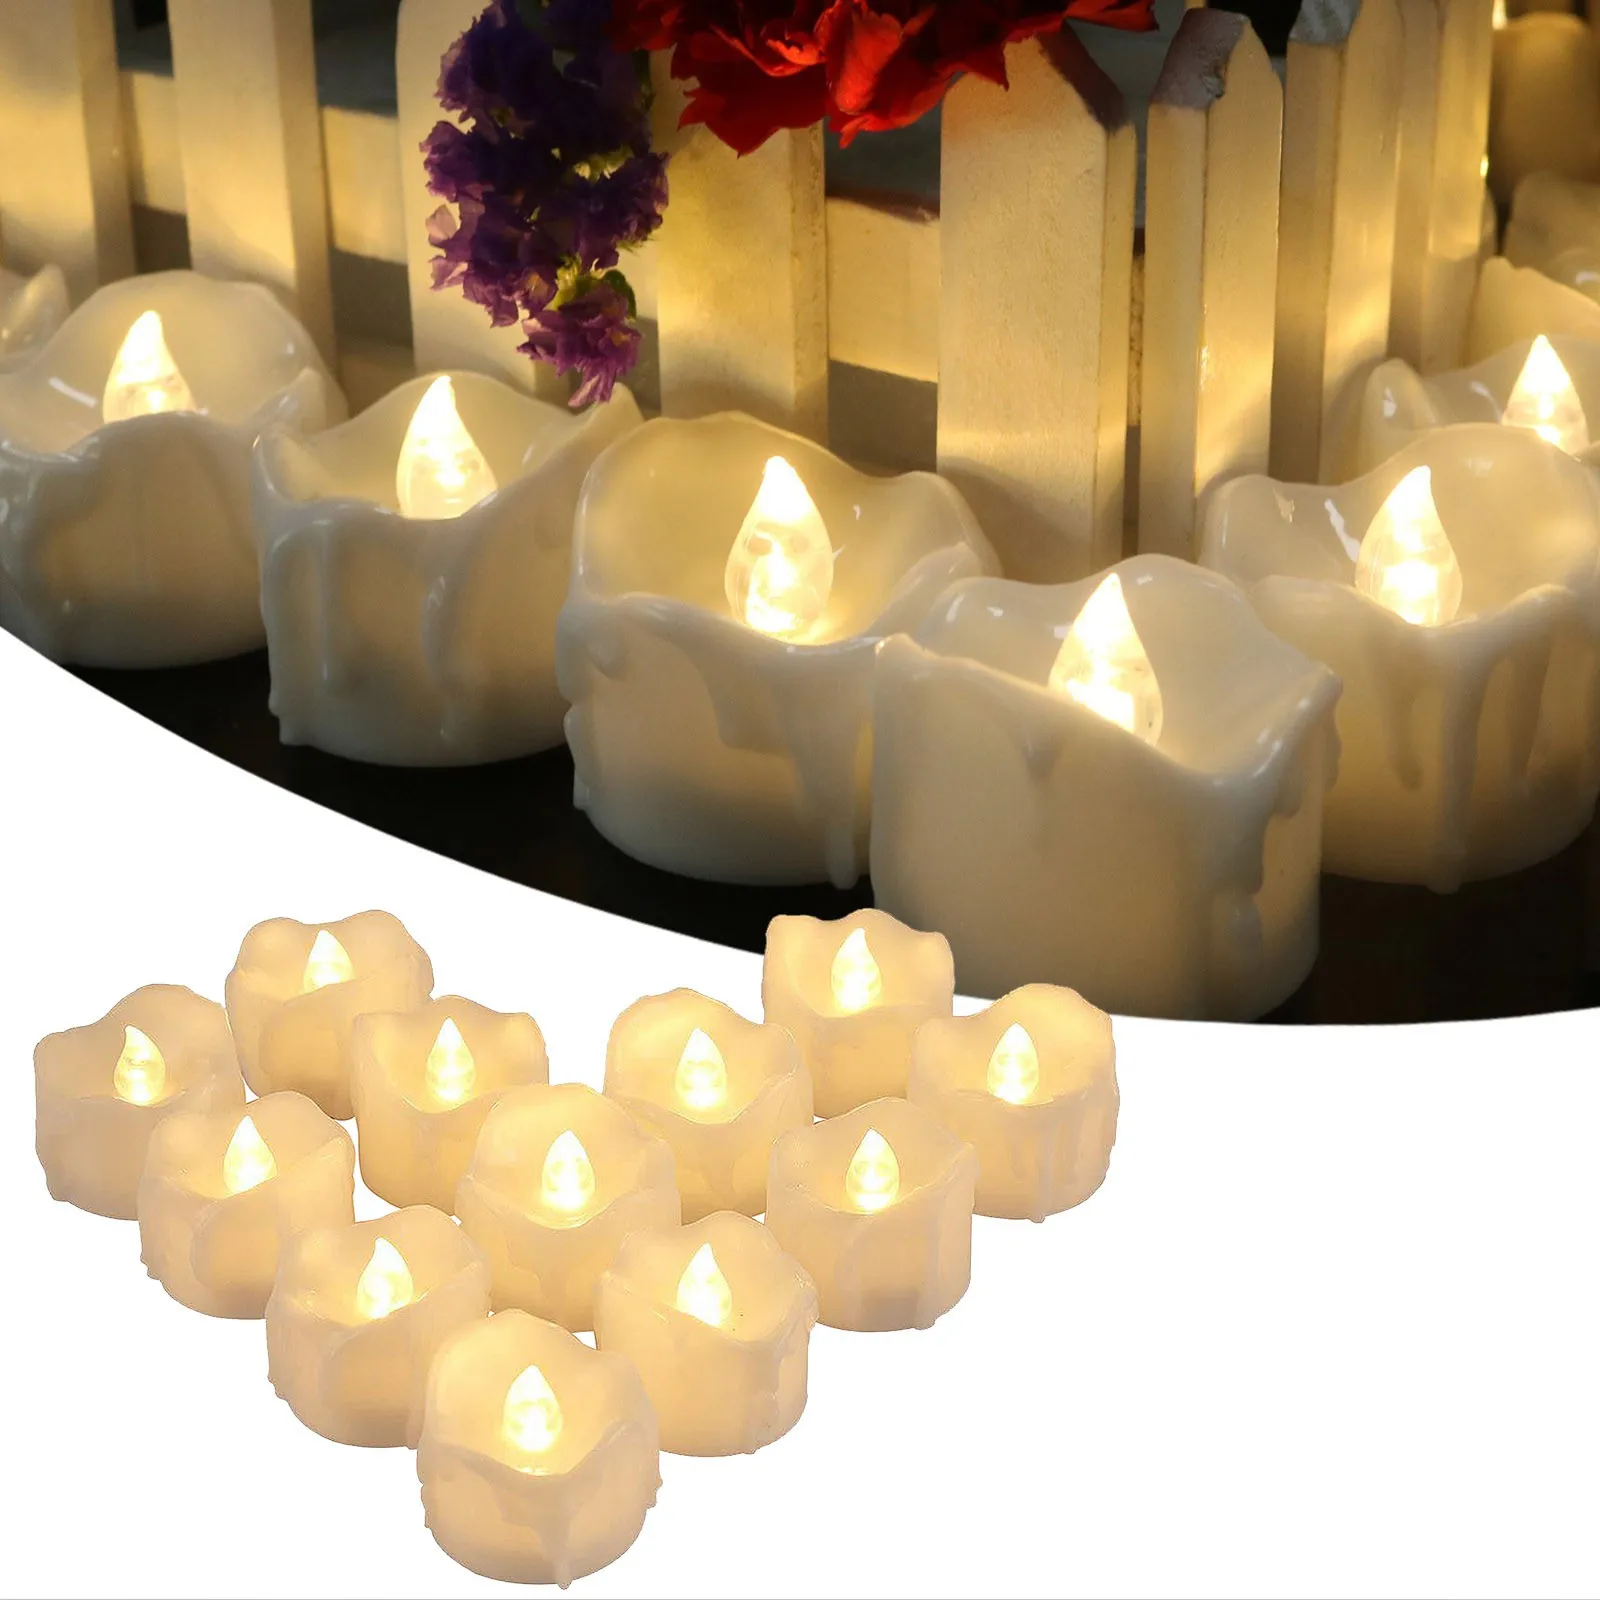 6 Hours On and 18 Hours Off Per Cycle Warm White 12pcs PChero Battery Operated LED Decorative Flameless Candles Flickering Tea Light Timer Candles Perfect for Birthday Wedding Party Home Decor - 